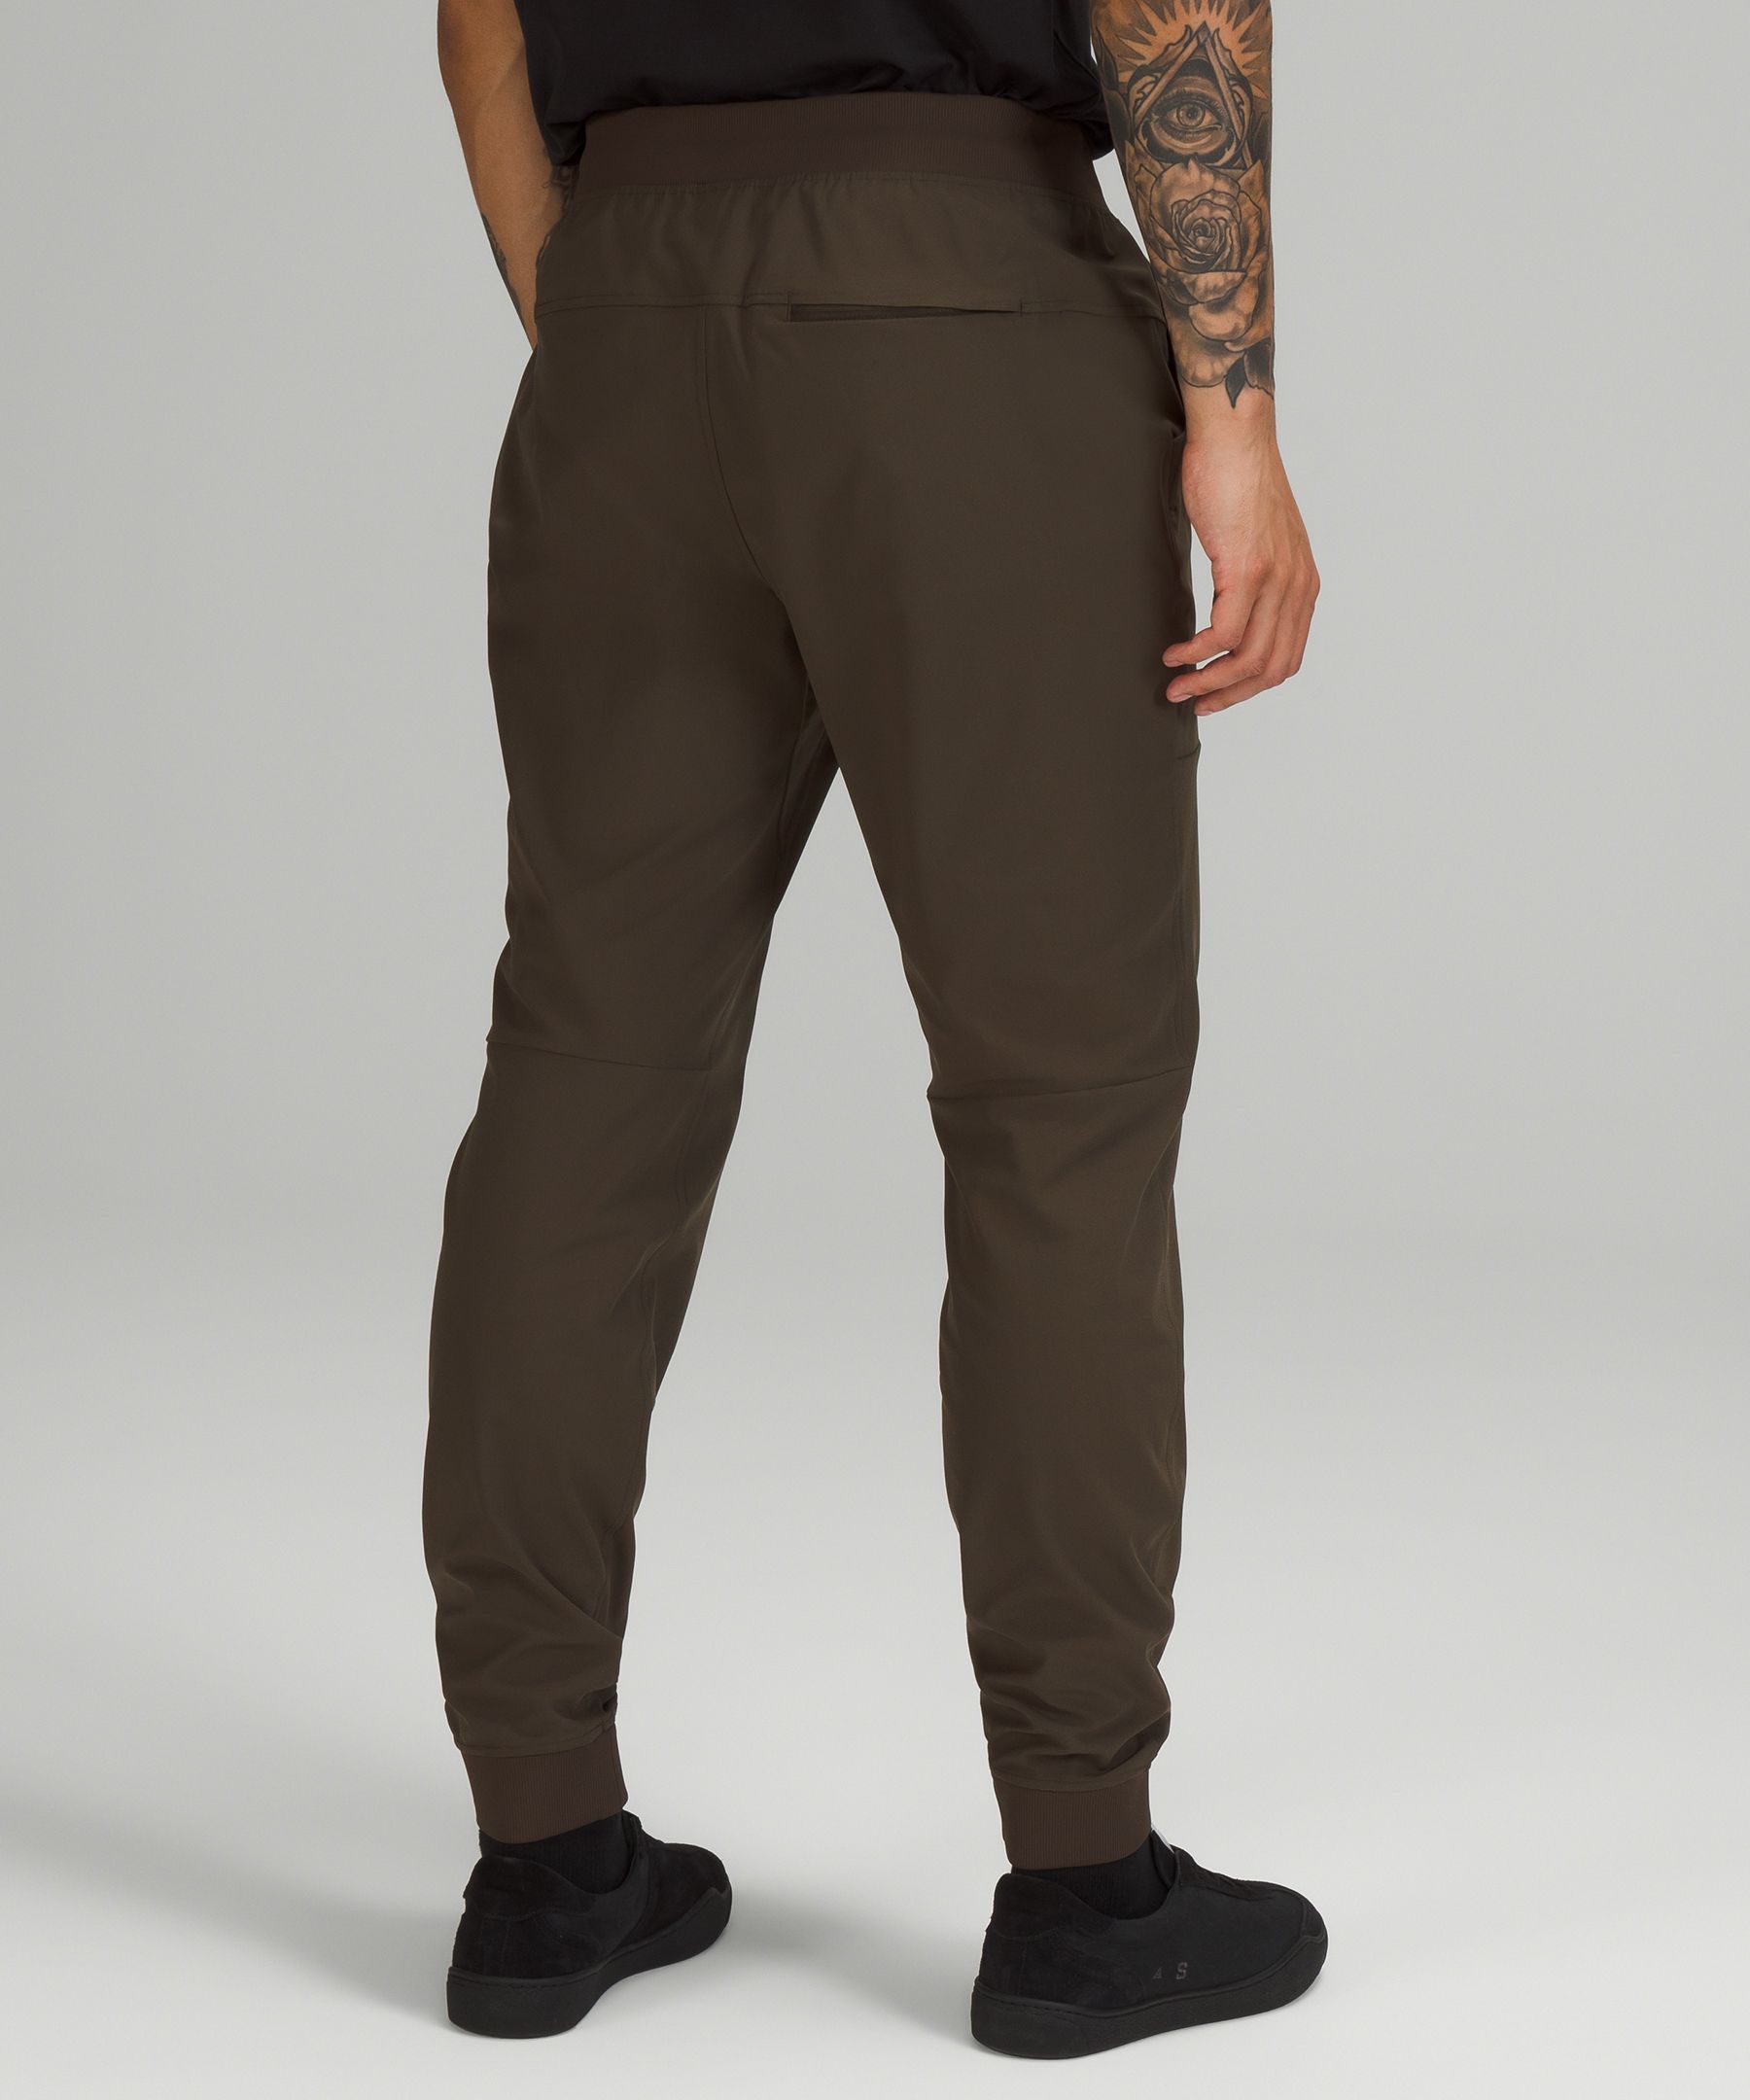 Mens Joggers Similar To Lululemon Athletica  International Society of  Precision Agriculture